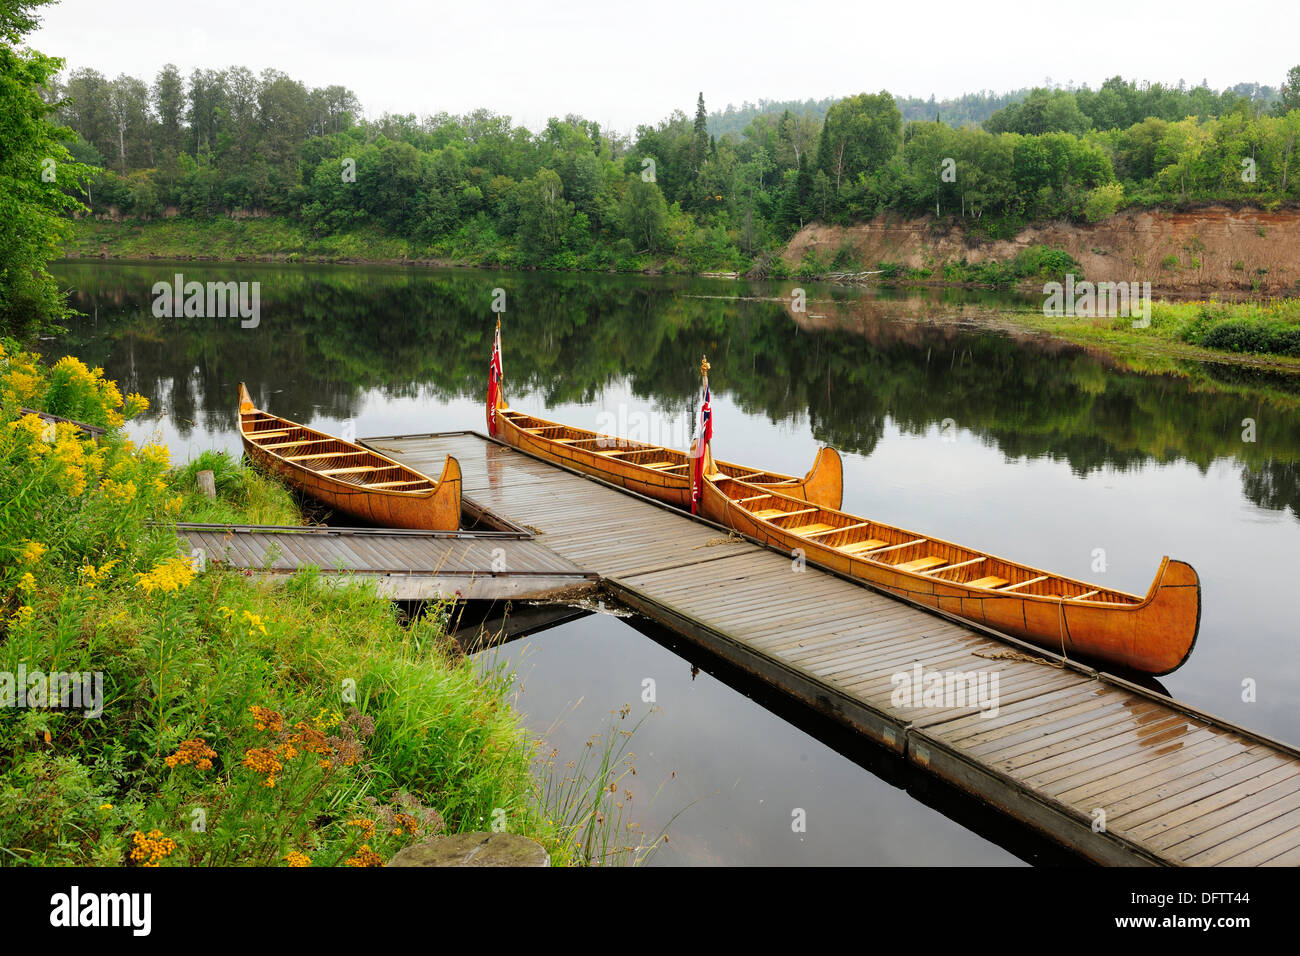 Traditional birch-bark canoes, as they were built by the Native American Indians in eastern Canada, Fort William, Thunder Bay Stock Photo